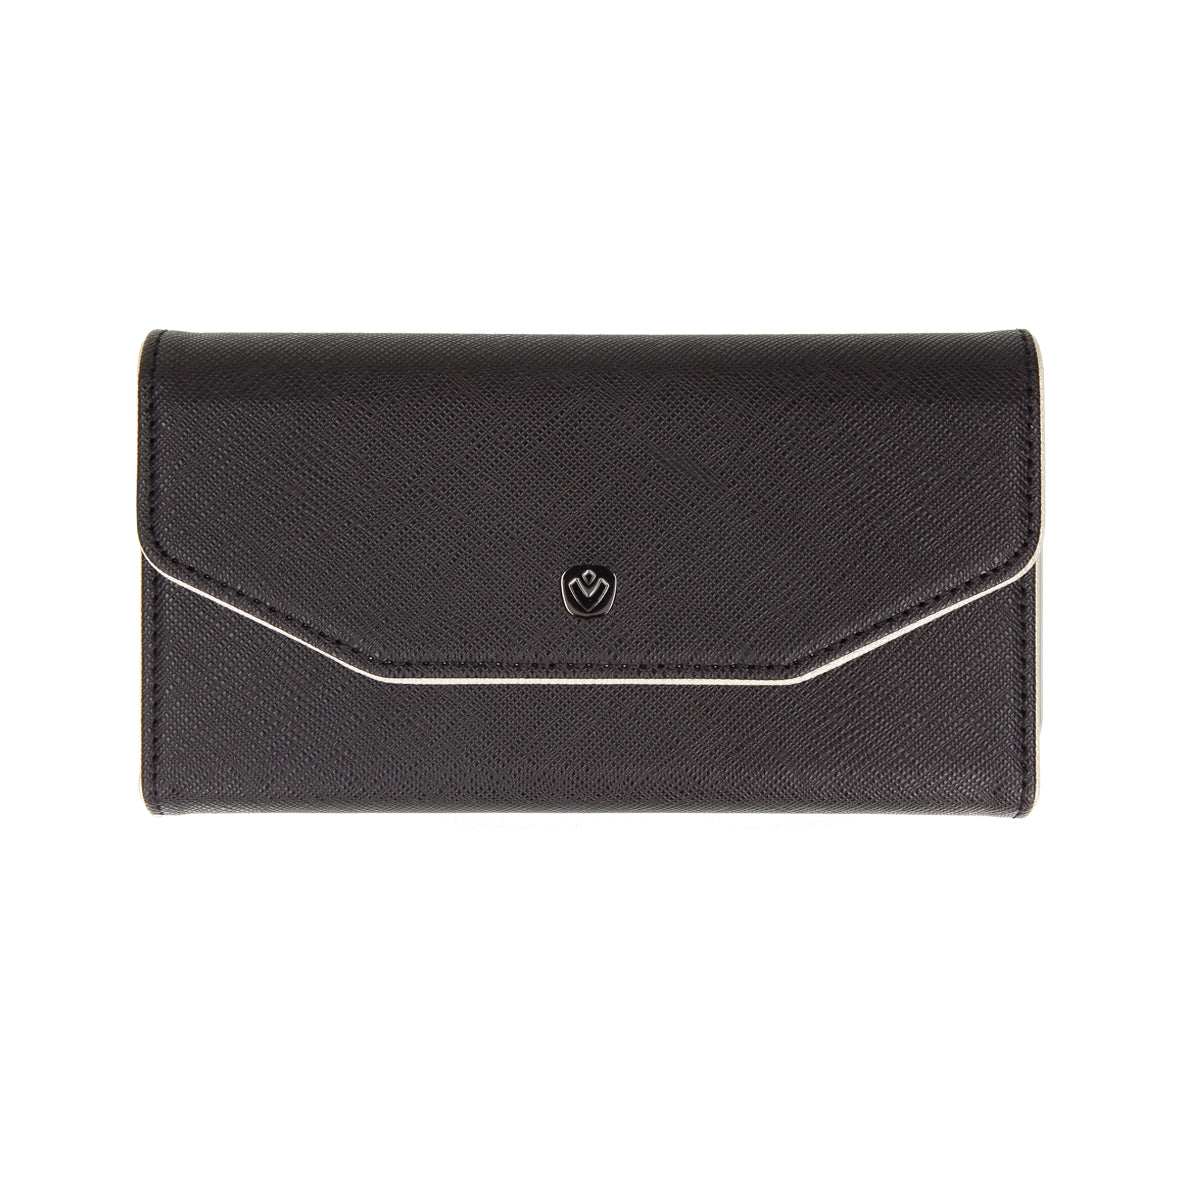 Abnehmbare Clutch Fashion Nuit iPhone 11 Pro Max - Schwarz